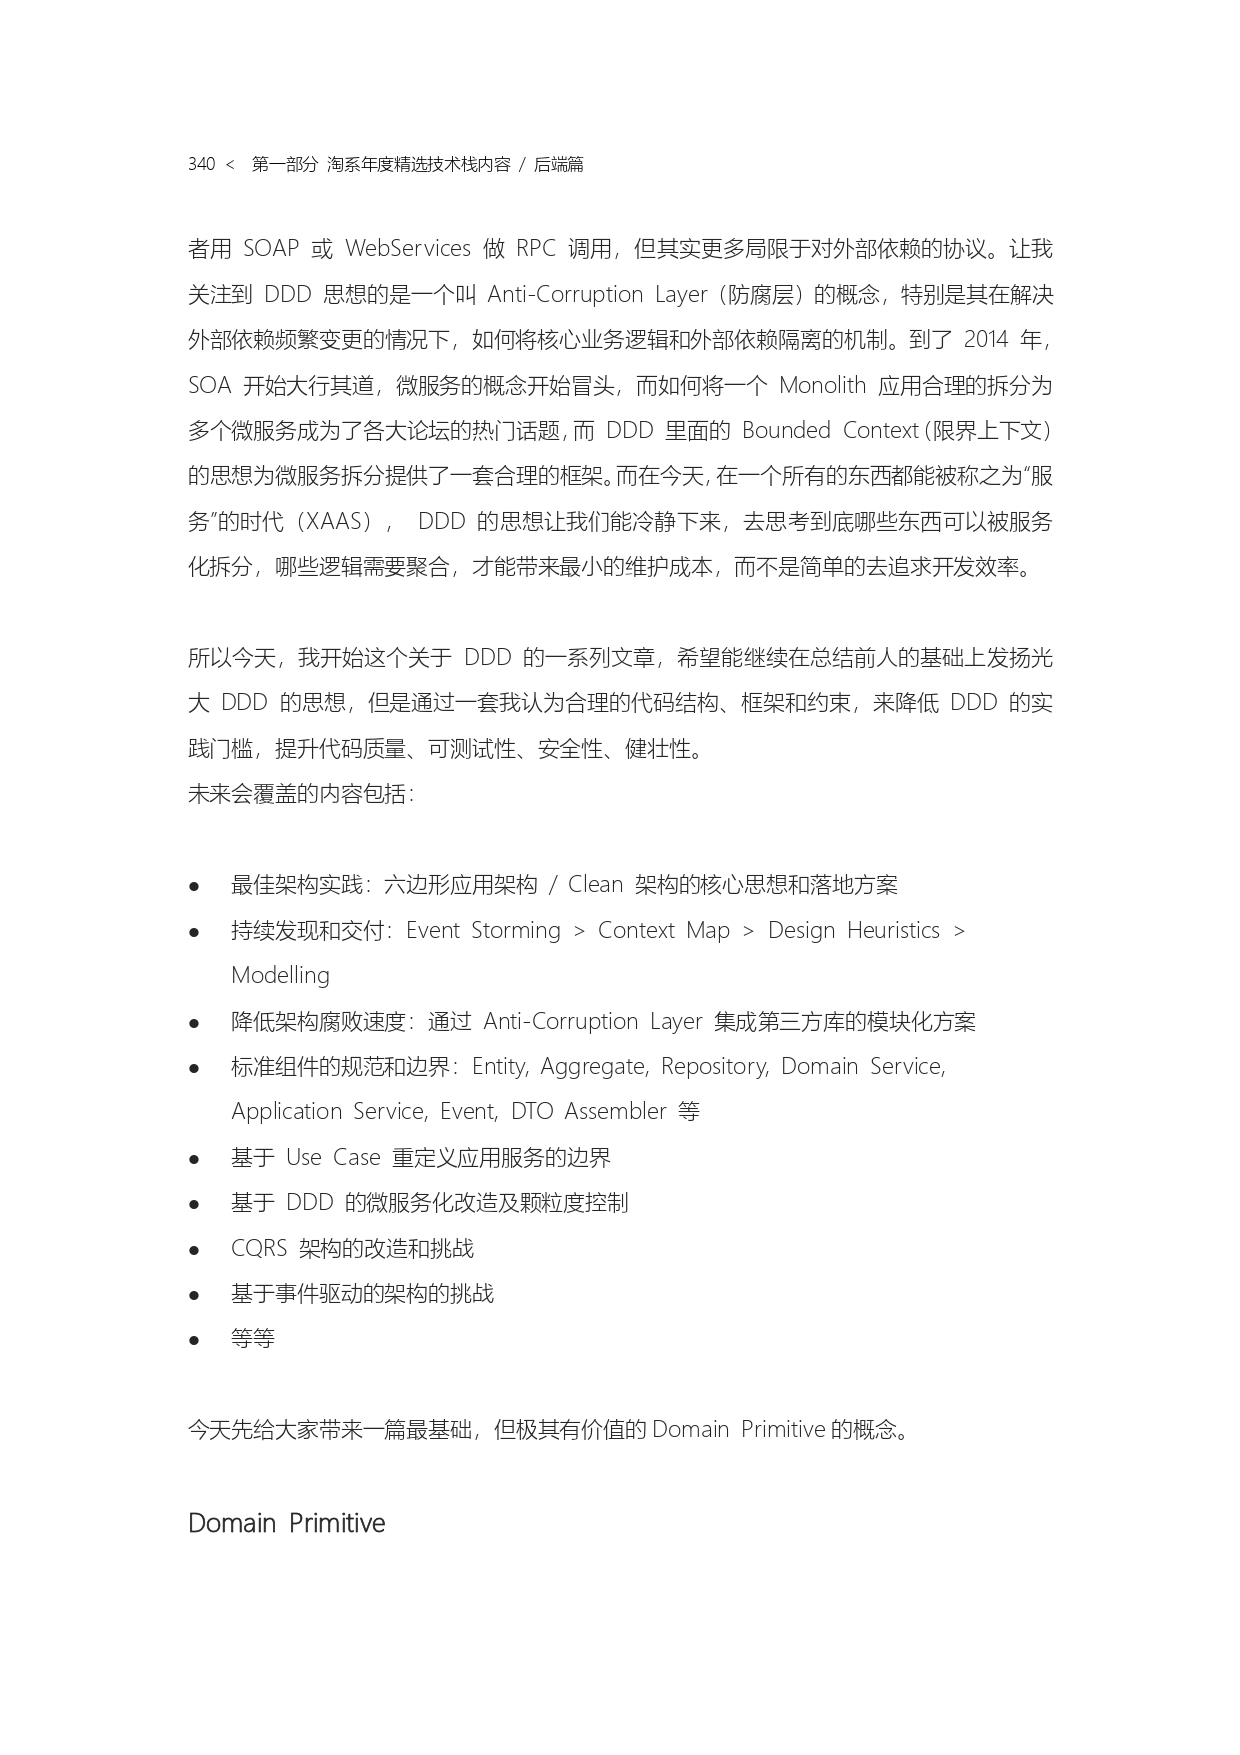 The Complete Works of Tao Technology 2020-1-570_page-0340.jpg